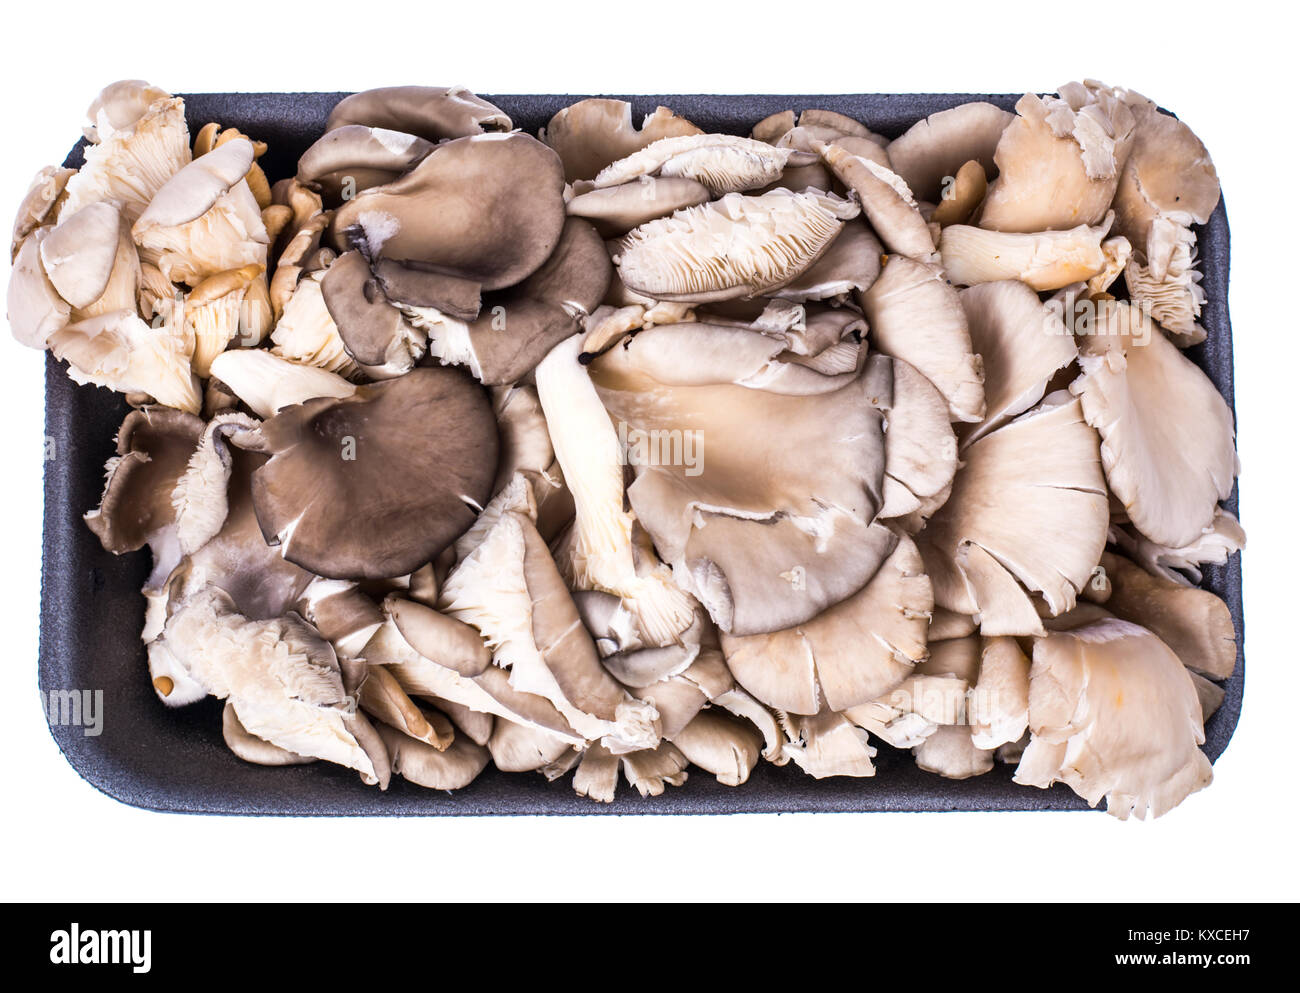 Bunch of fresh oyster mushrooms in black package Stock Photo